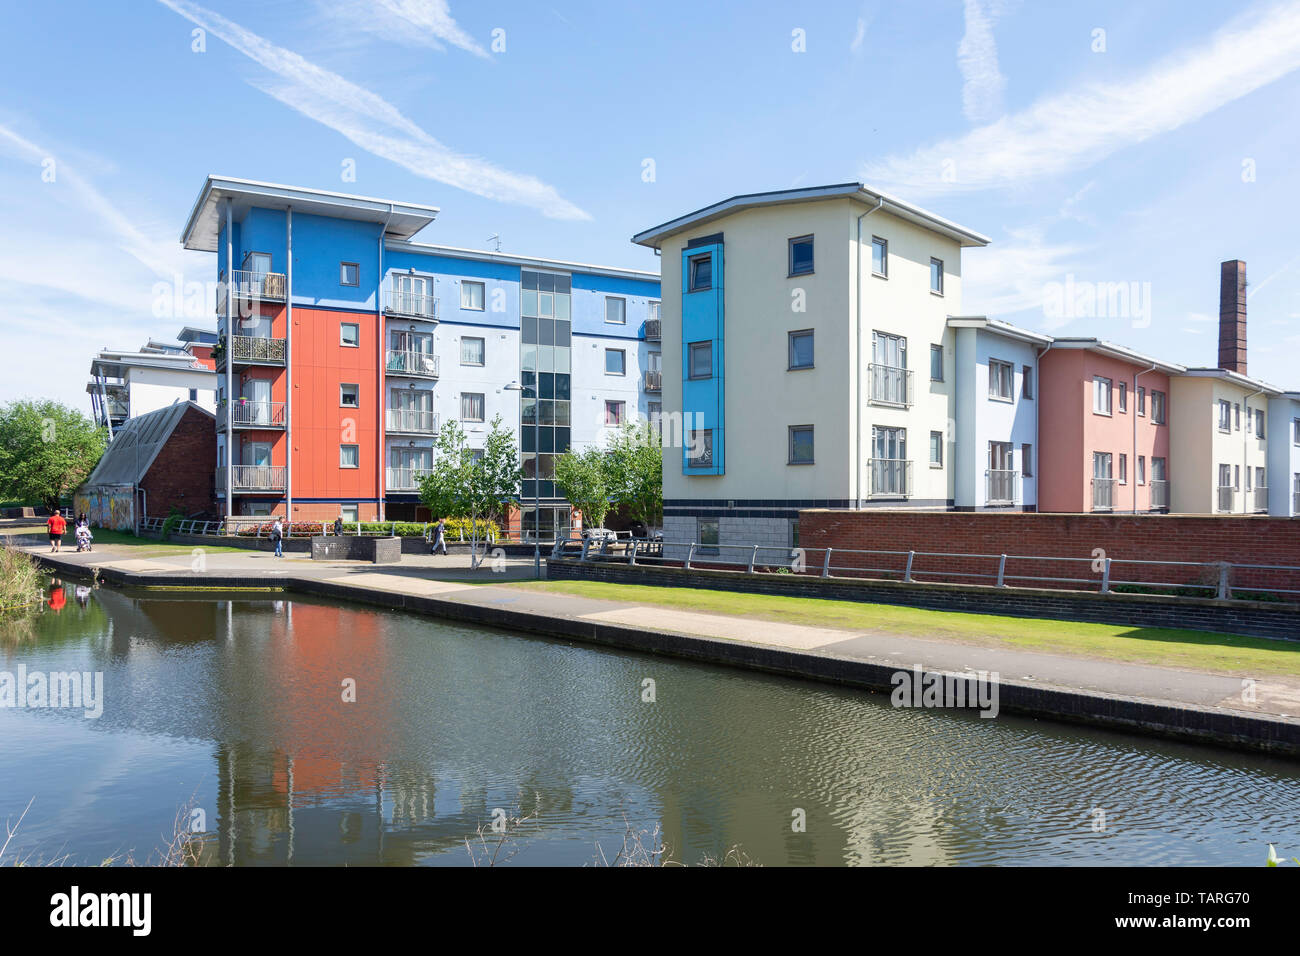 Canalside apartment buildings at Walsall Canal, Walsall, West Midlands, England, United Kingdom Stock Photo